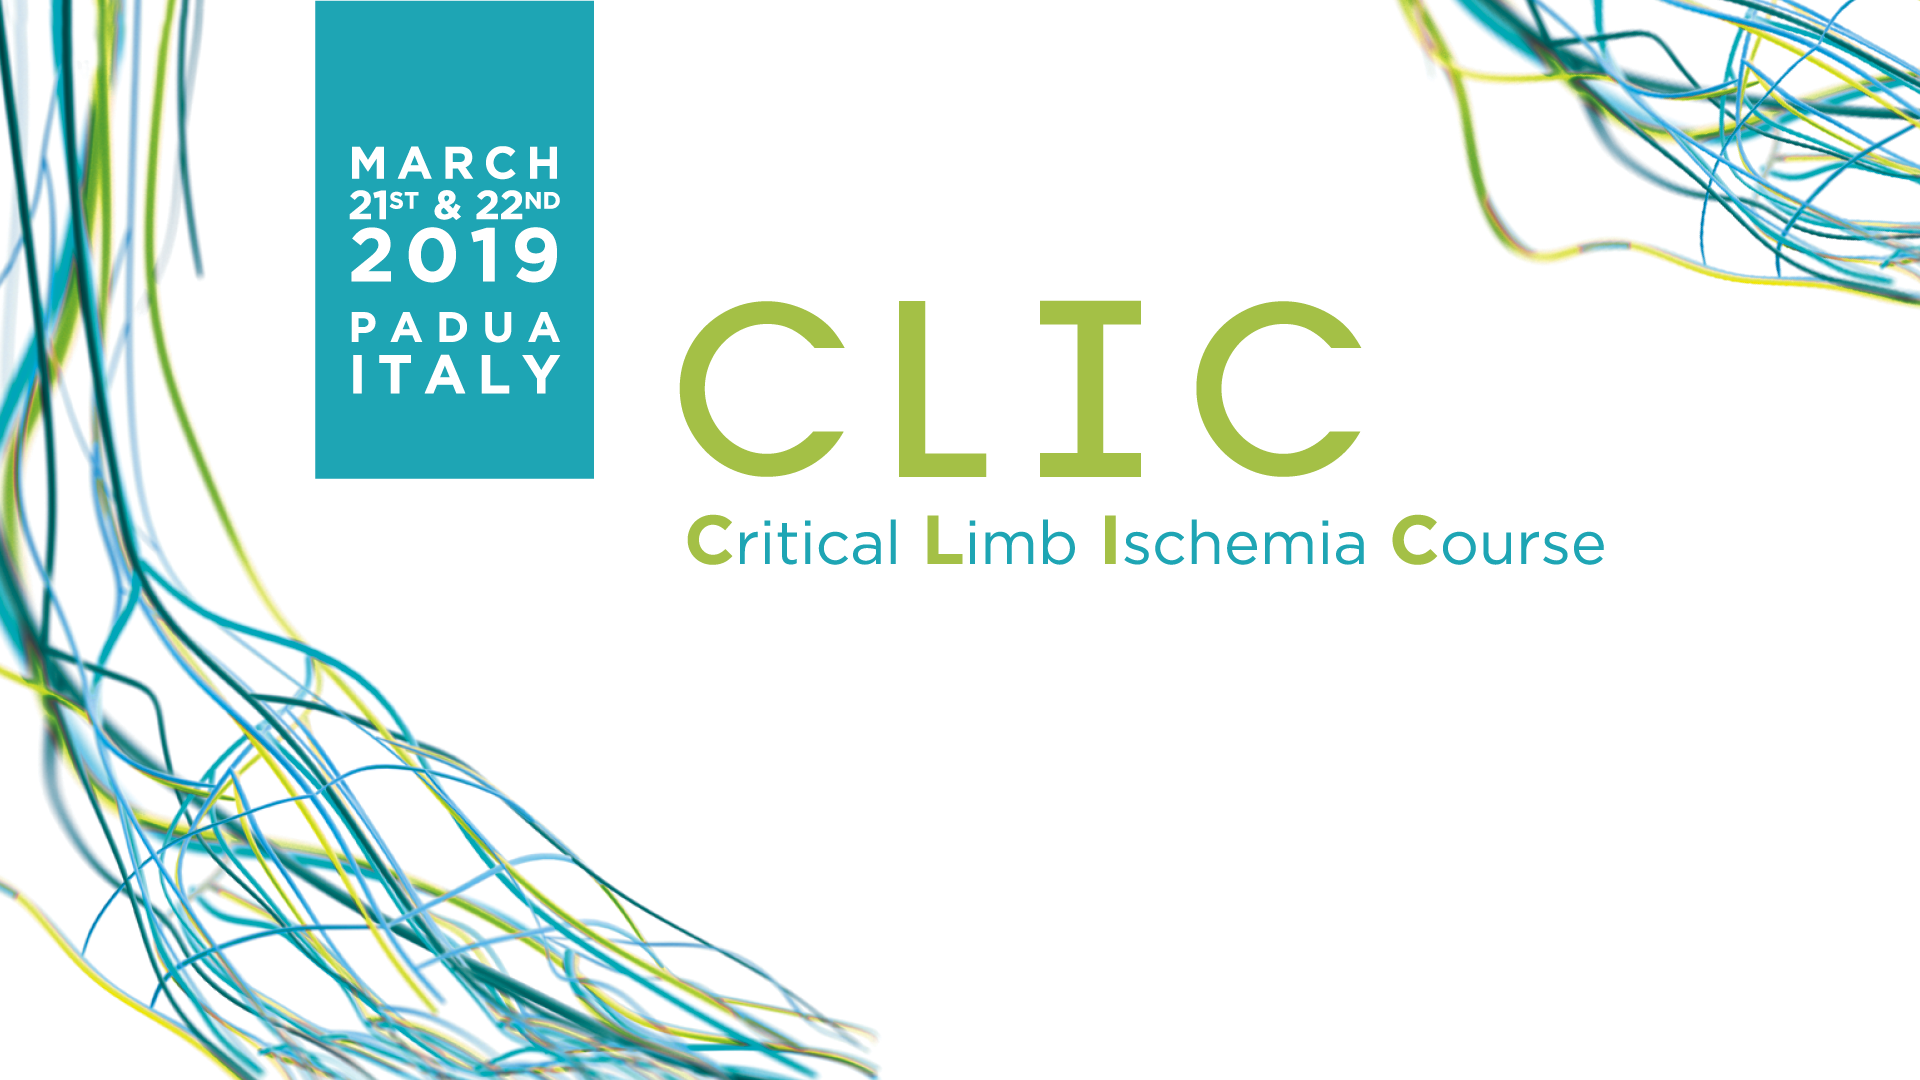 CLIC 2019 SESSION VII: MULTIDISCIPLINARY APPROACH IN NO OPTION PATIENT